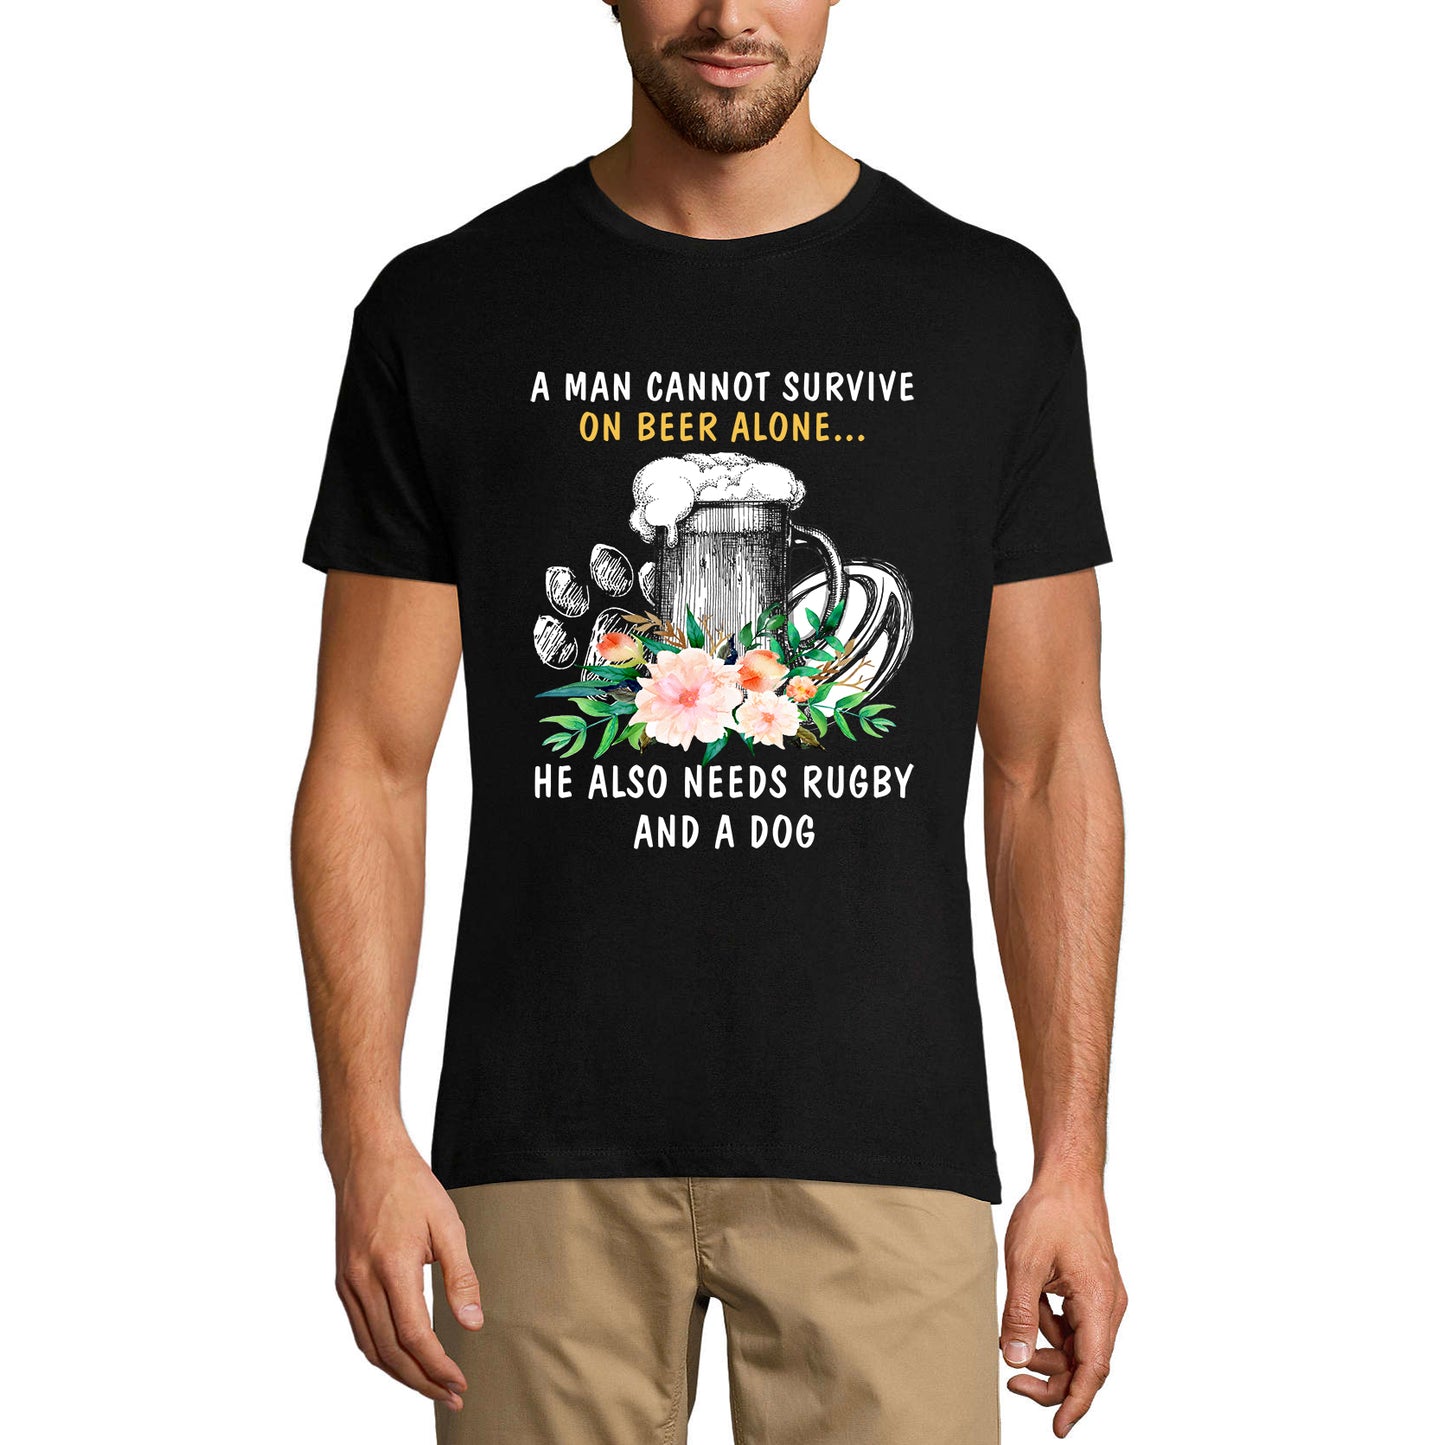 ULTRABASIC Herren-T-Shirt „Man Can Not Survive on Beer Alone He Needs Also Rugby and Dog – Spruch Bierliebhaber-T-Shirt“.